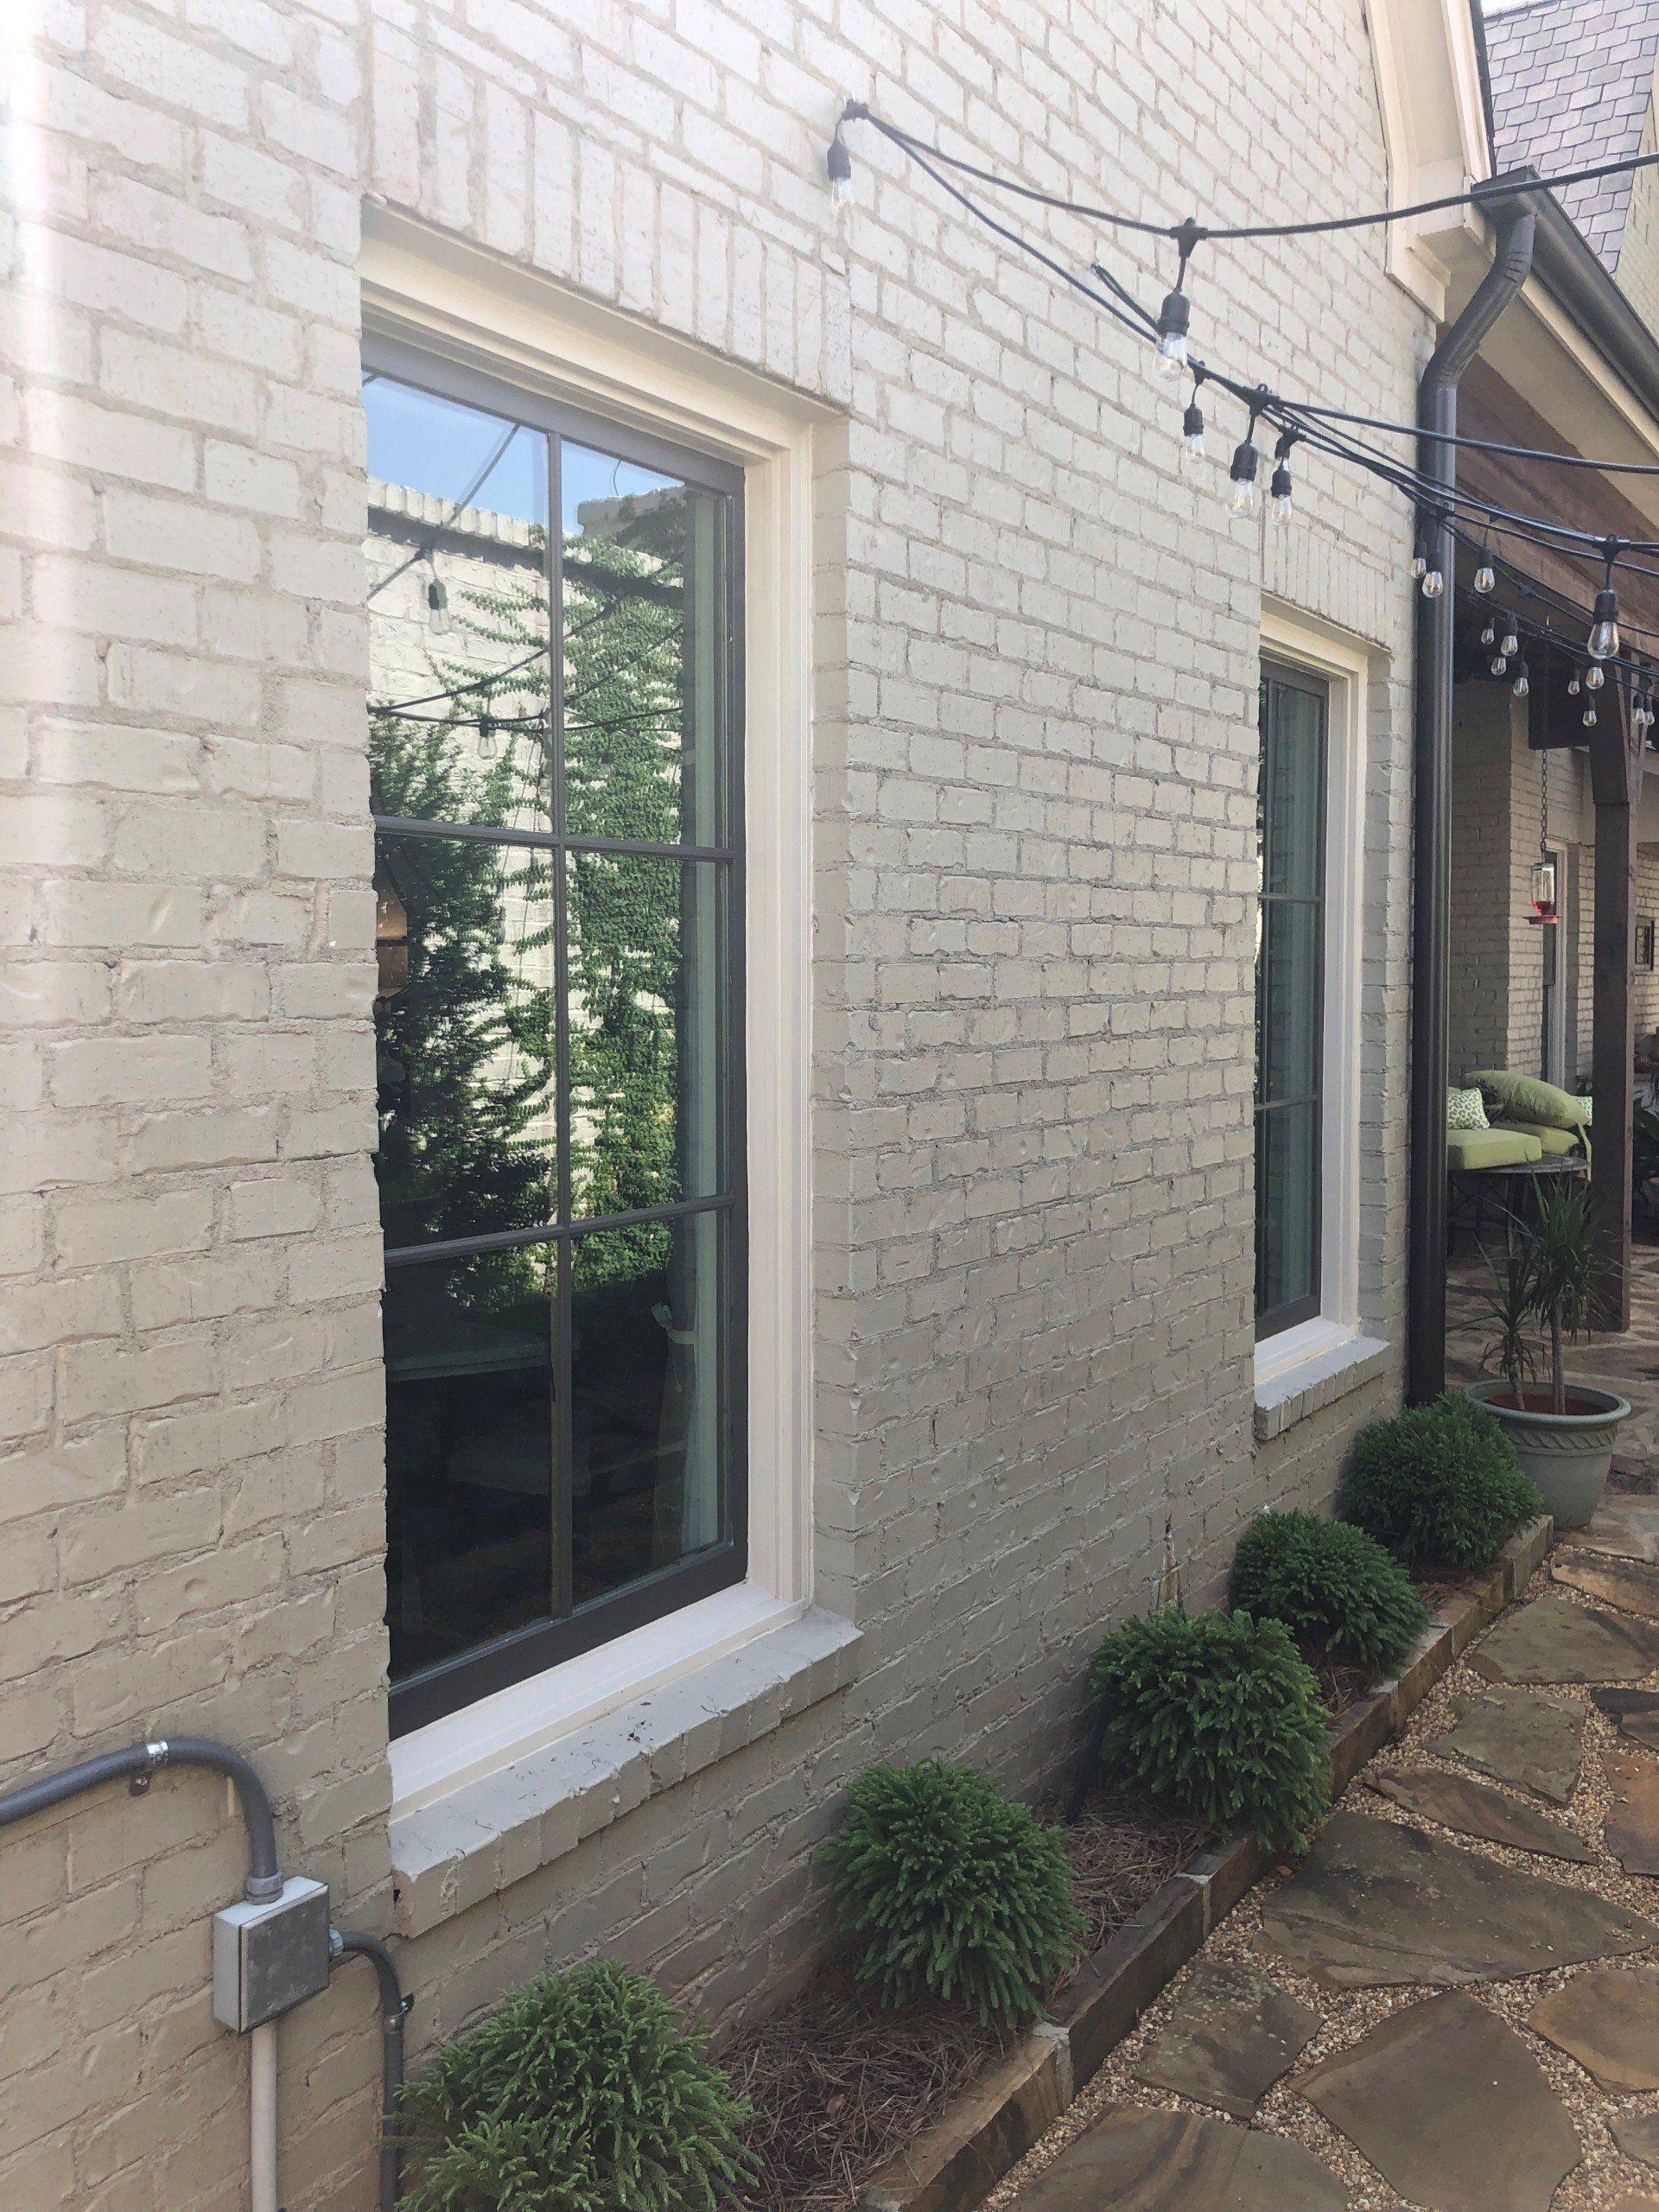 Home window tinting service - spf tint installed to home windows in Birmingham, Alabama